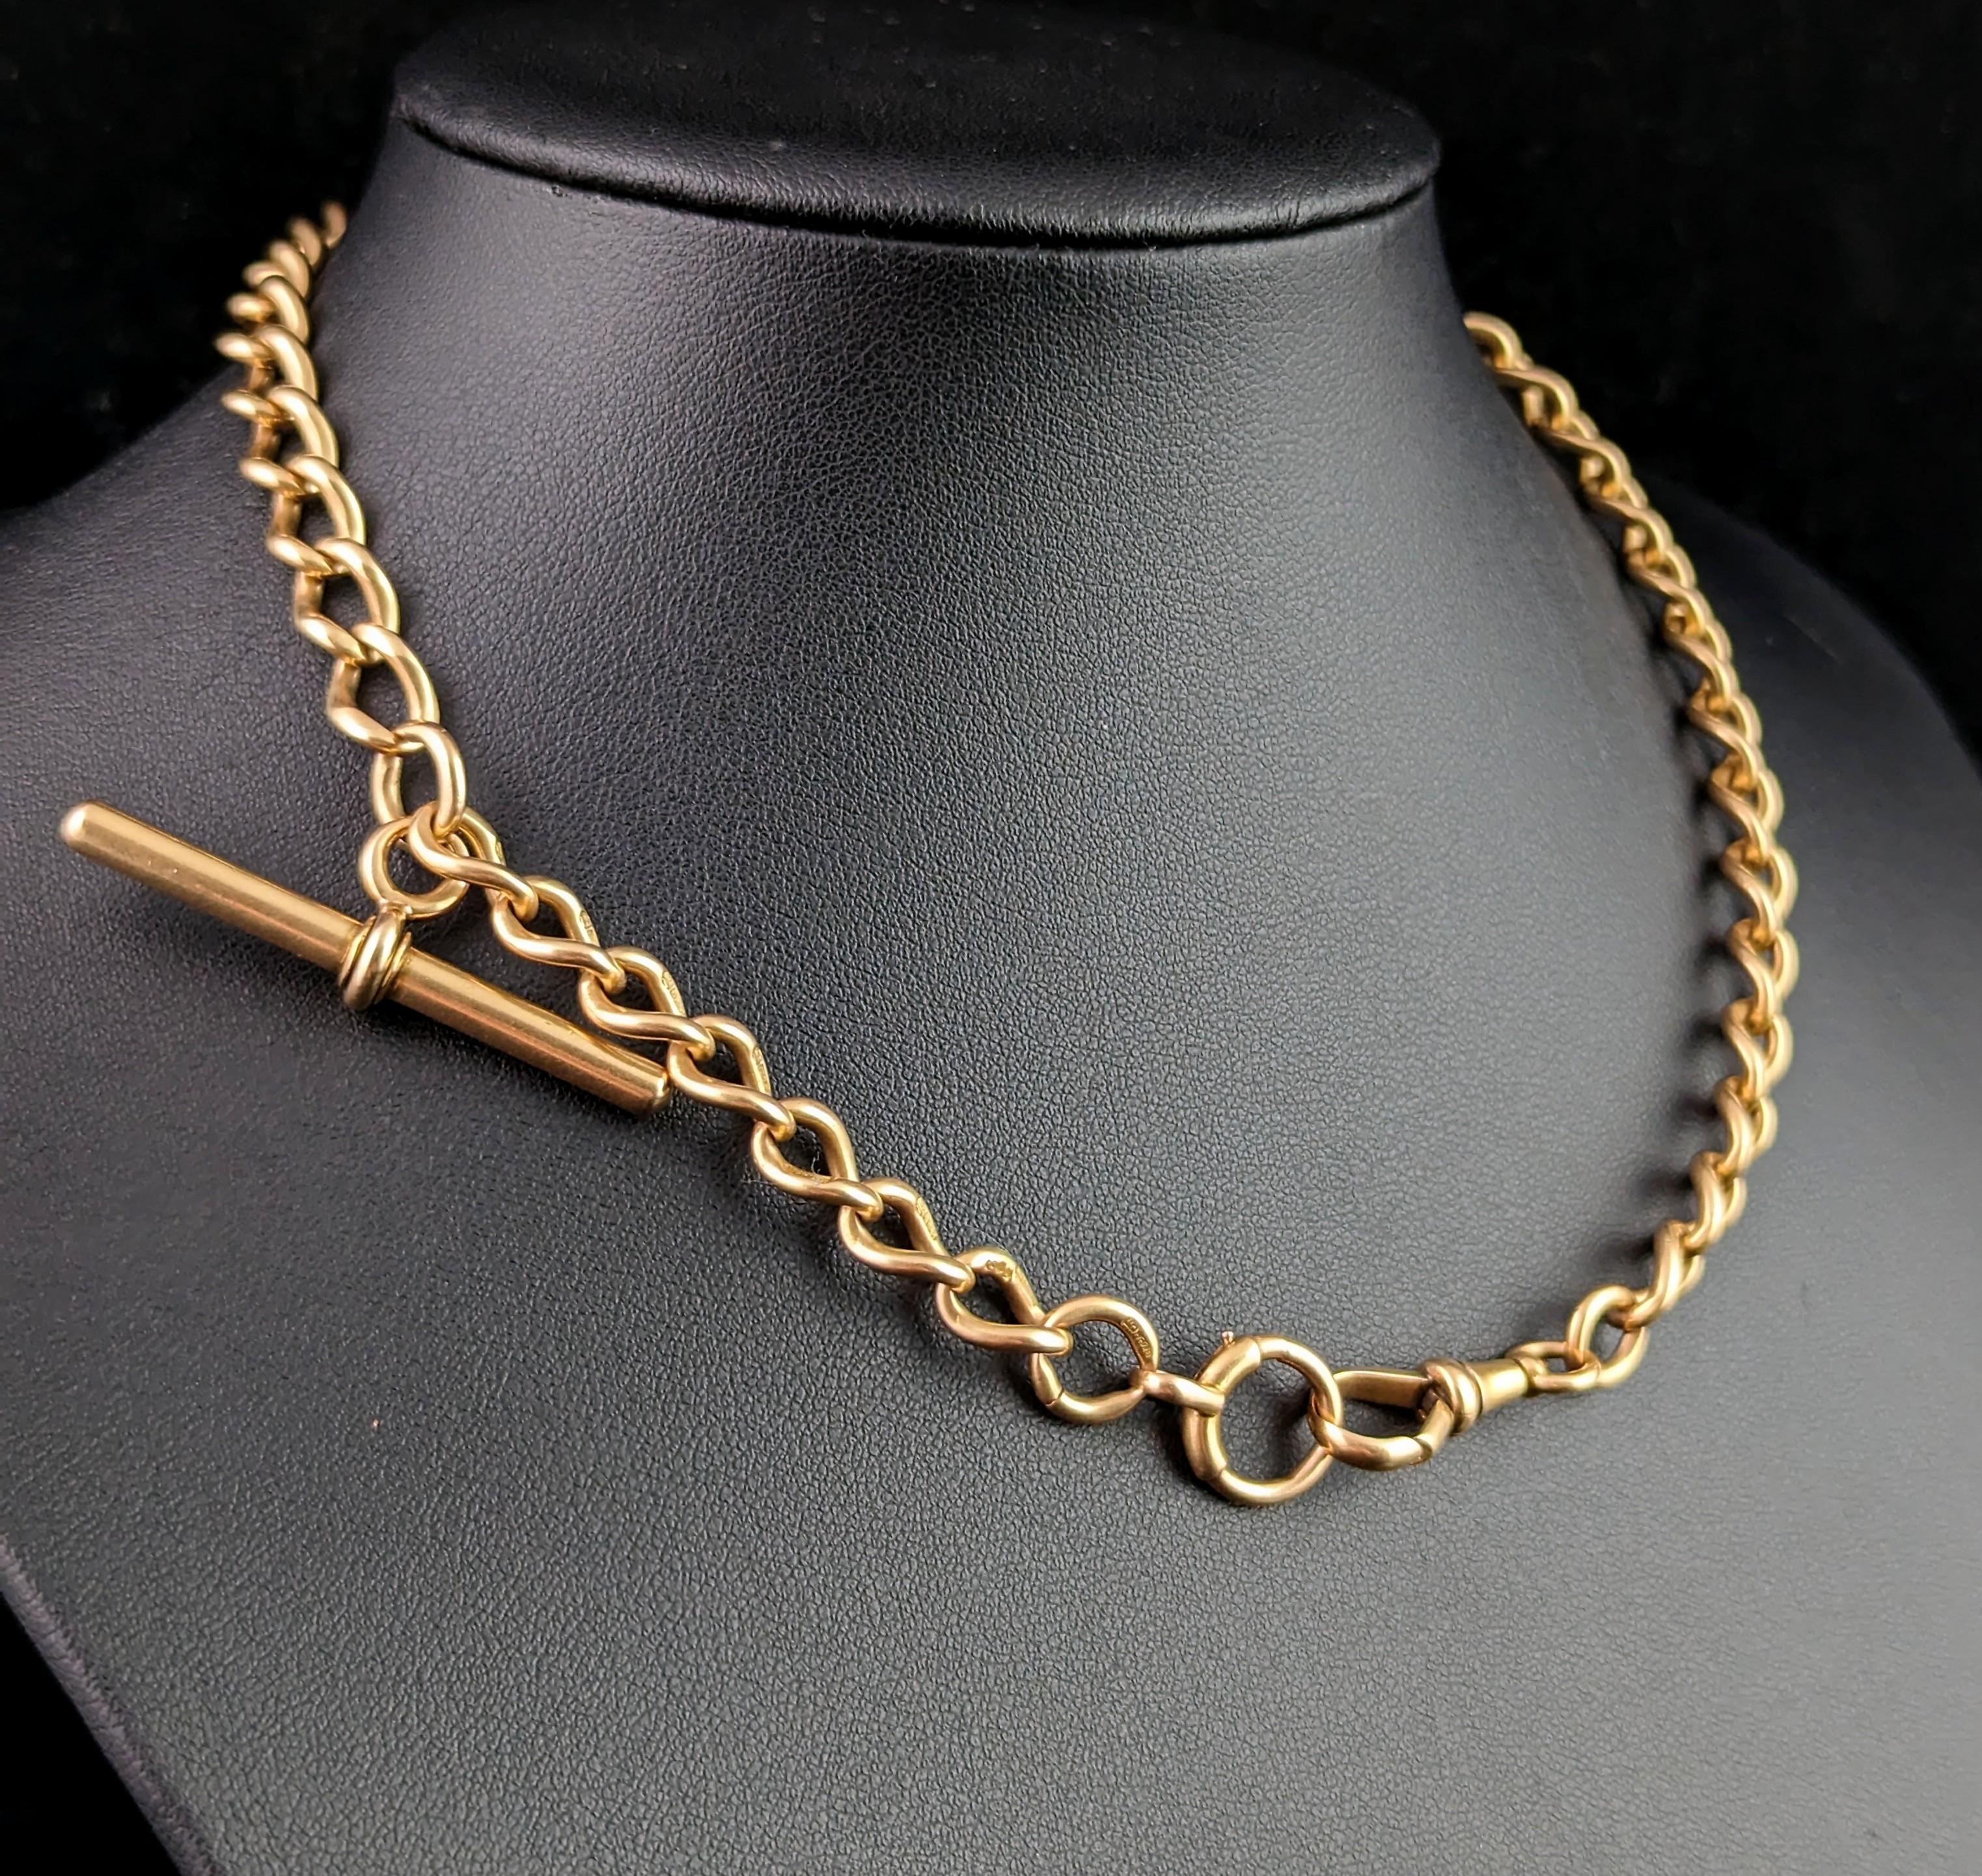 You can't help but fall in love with this impeccable antique, late Victorian era 15kt gold Albert chain.

A beautifully designed chain with elongated open curb links giving it a sleek design and the fact that this chain is crafted in rich yellow